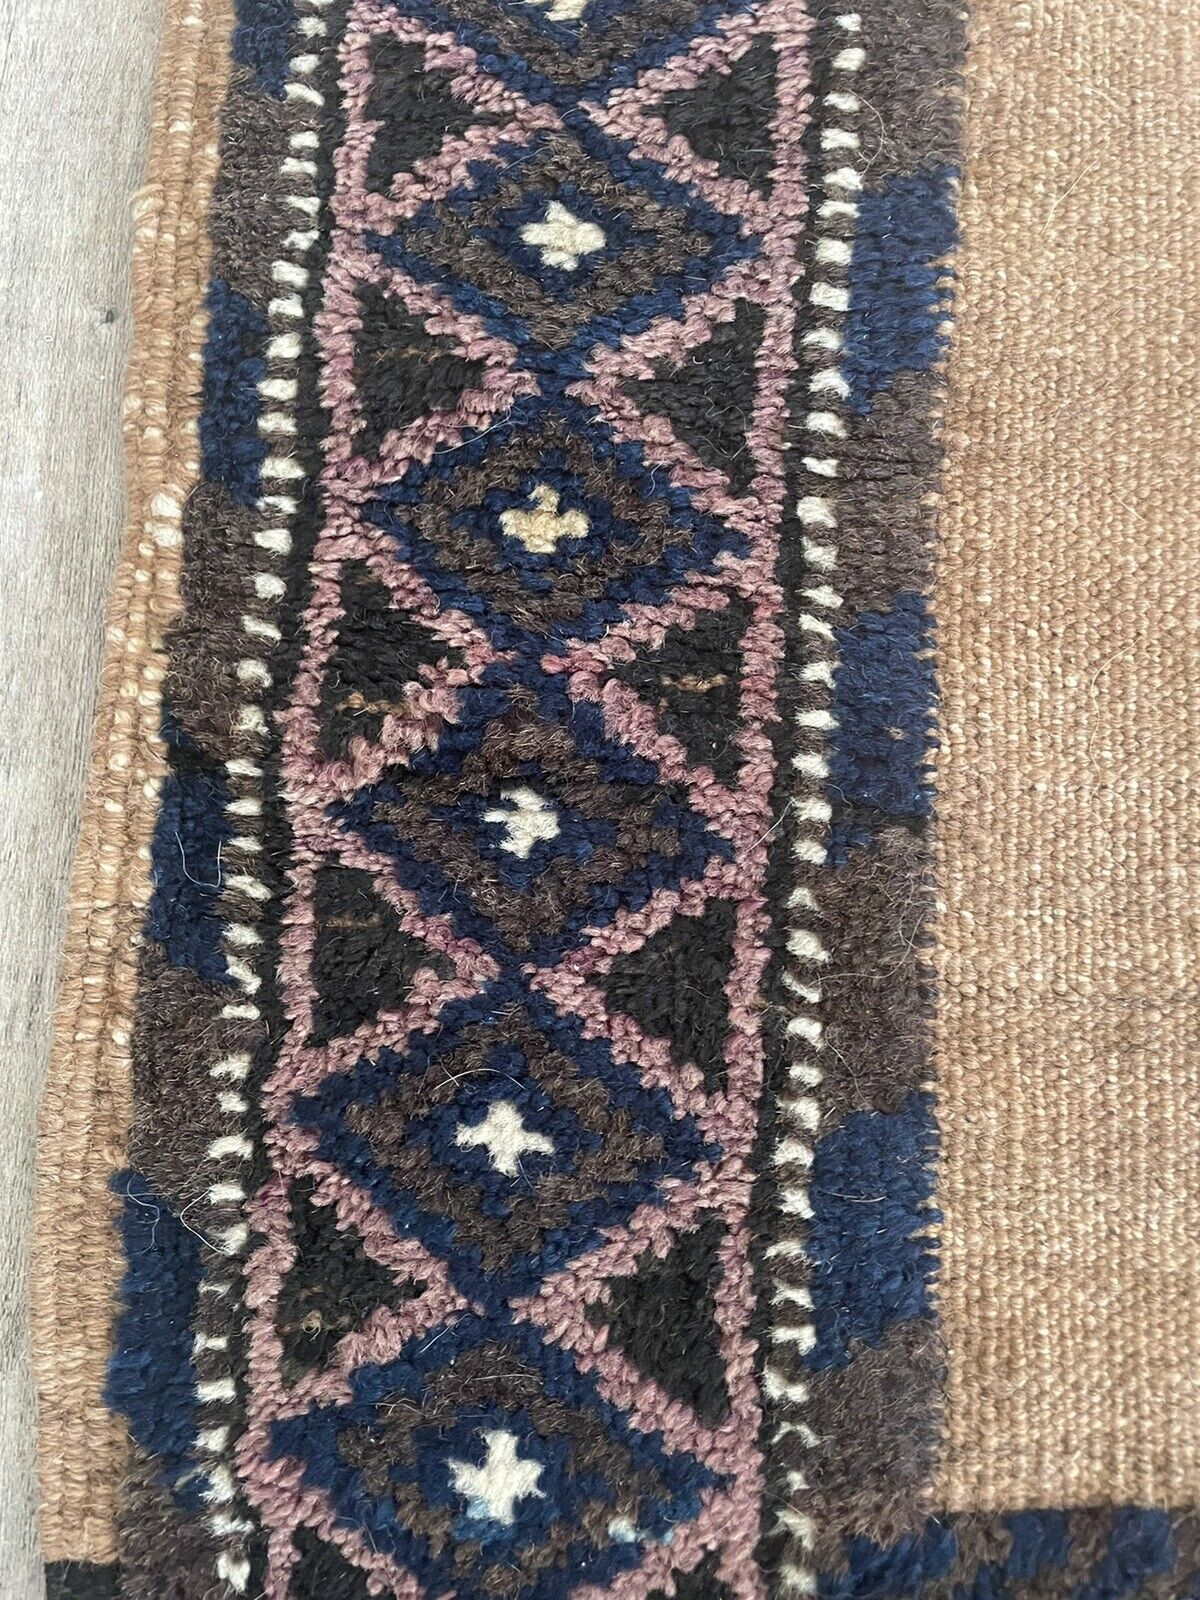 Close-up of fringe on Handmade Antique Afghan Baluch Collectible Rug - Detailed view showcasing the fringes at both ends of the rug, indicating its handmade nature and adding to its authenticity.